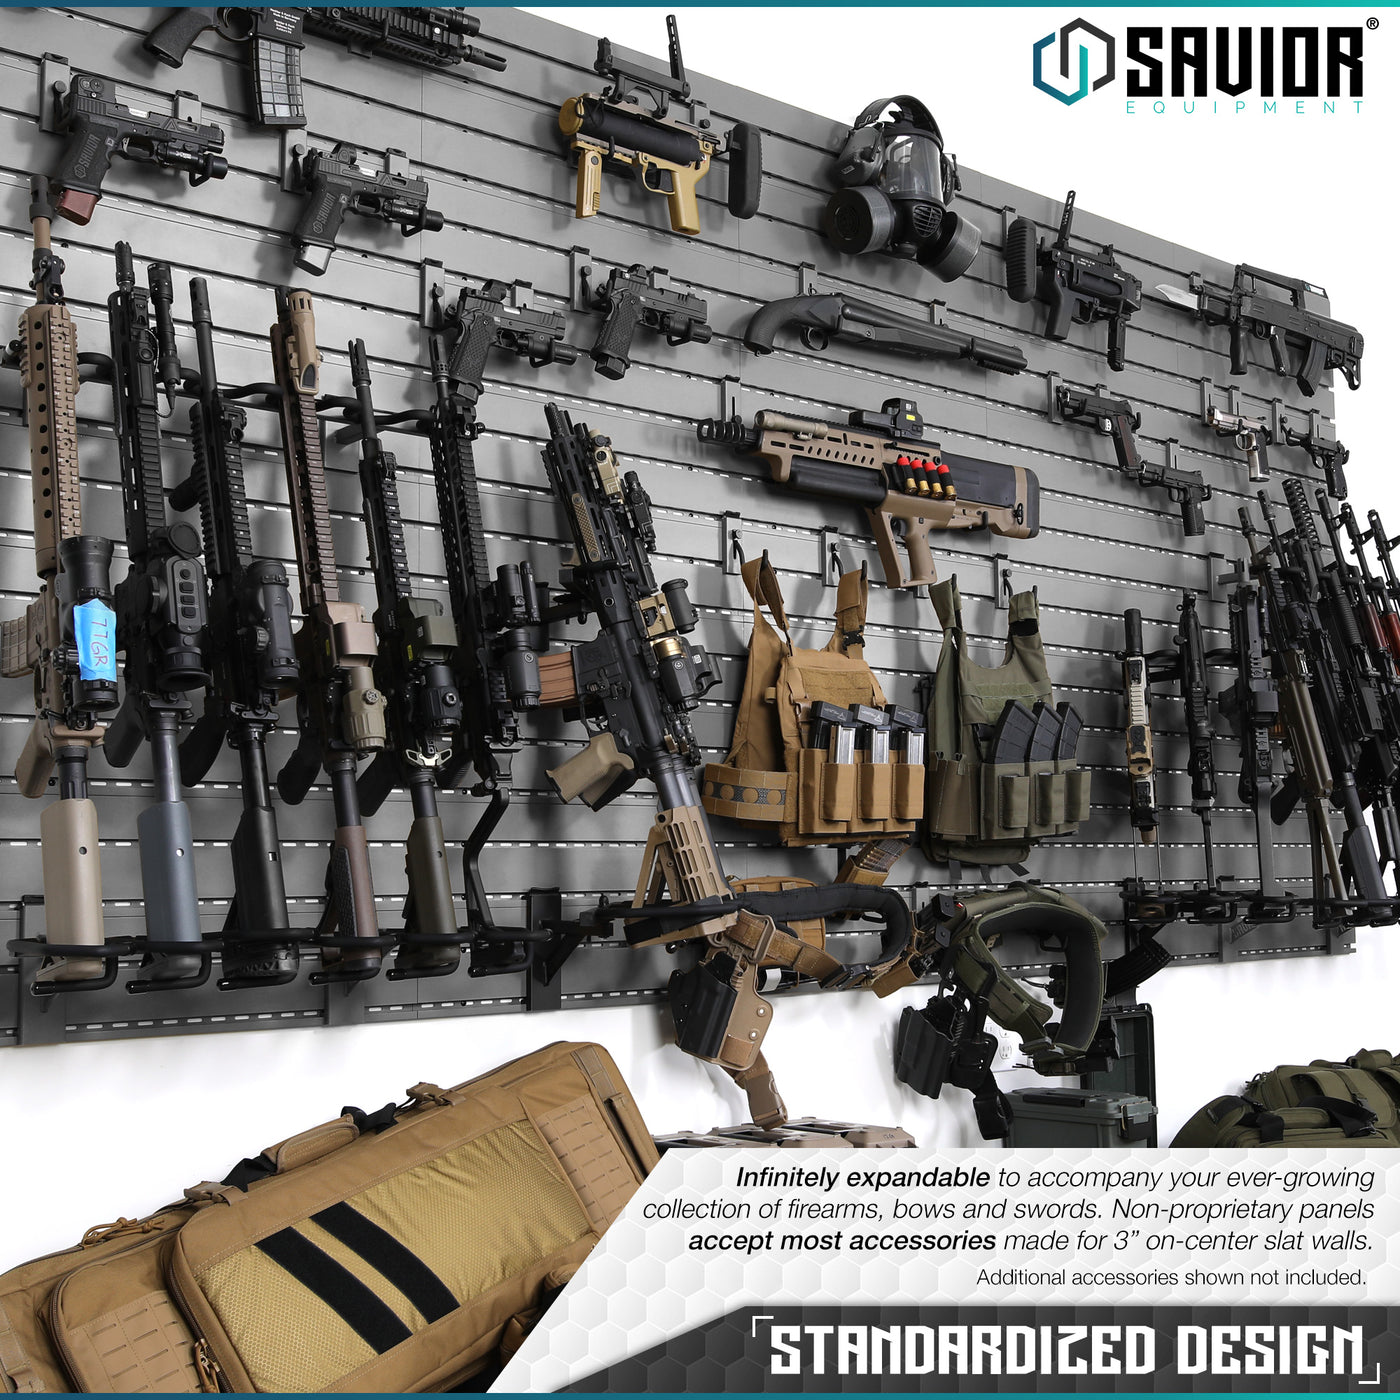 Standardized Design - Infinitely expandable to accompany your ever-growing collection of firearms, bows and swords. Non-proprietary panels accept all accessories made for 3" on-center slat walls. Additional accessories shown not included.